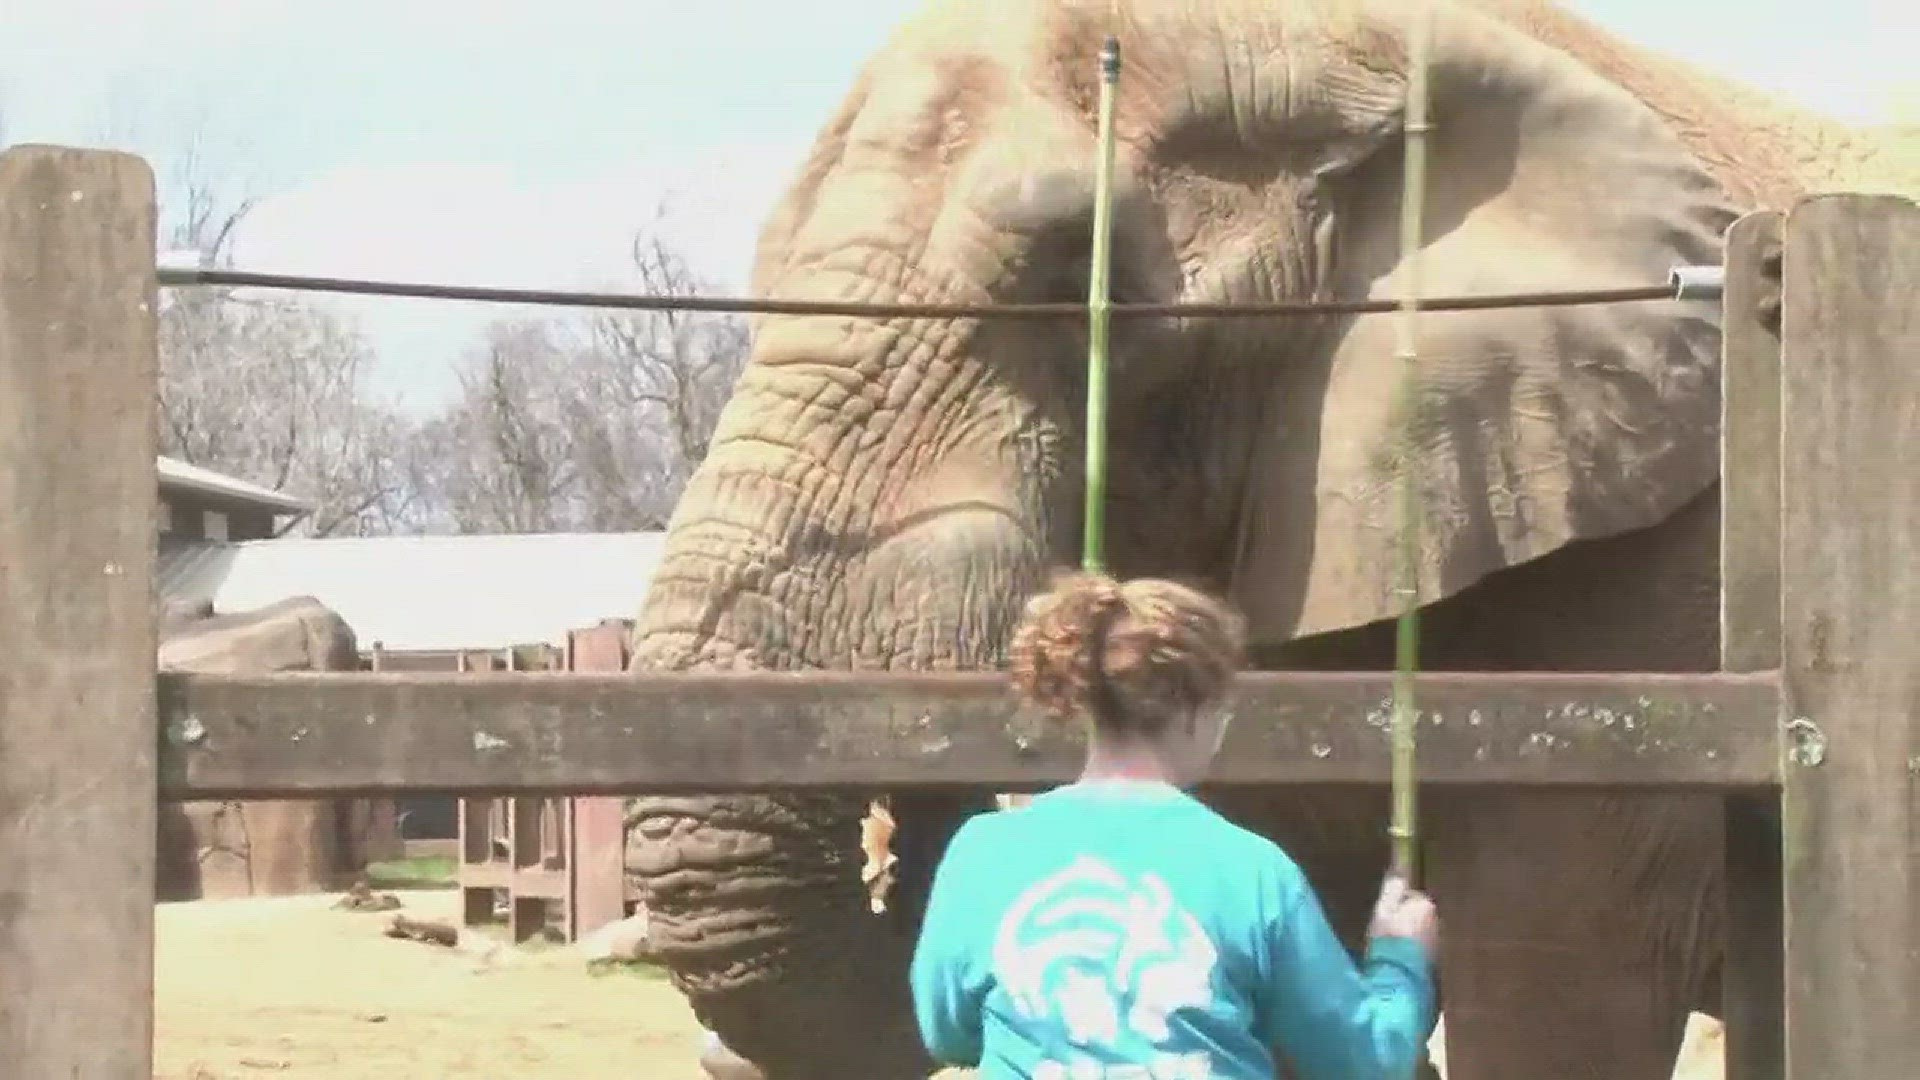 Zoo Knoxville's elephant just turned 40 years old.